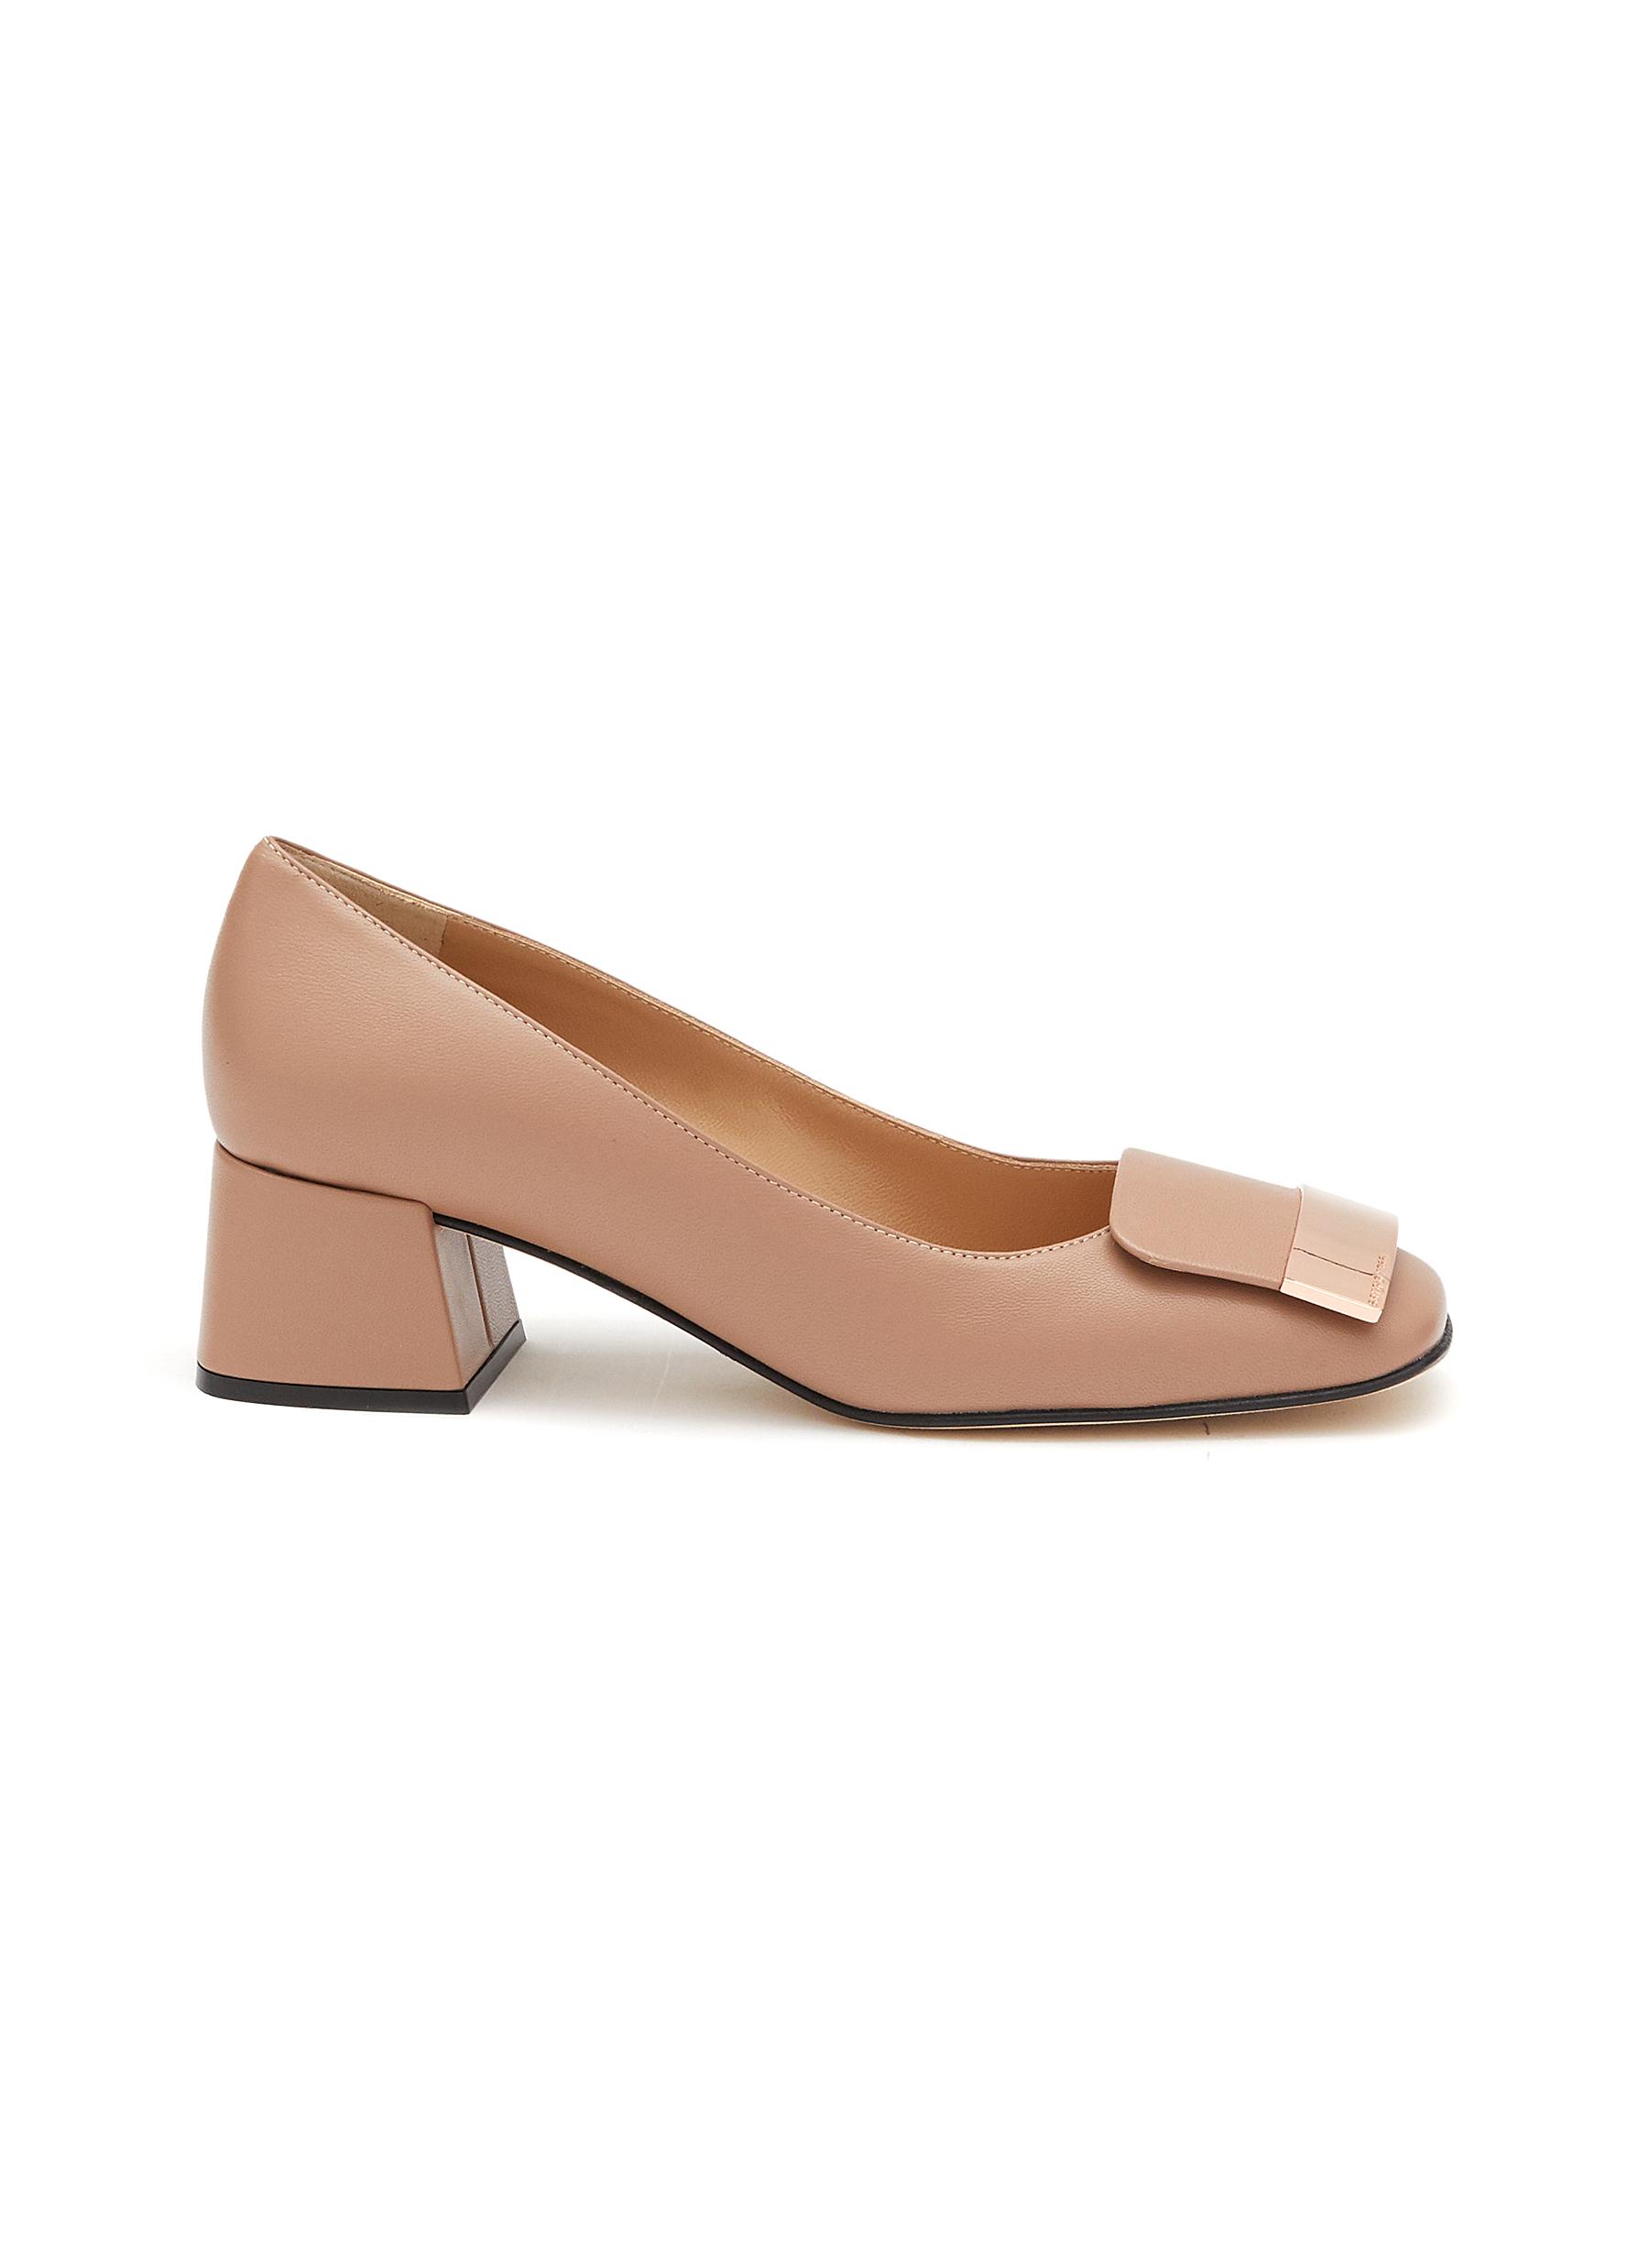 Women's Comfortable Block Heels with Arch Support | Vionic Shoes